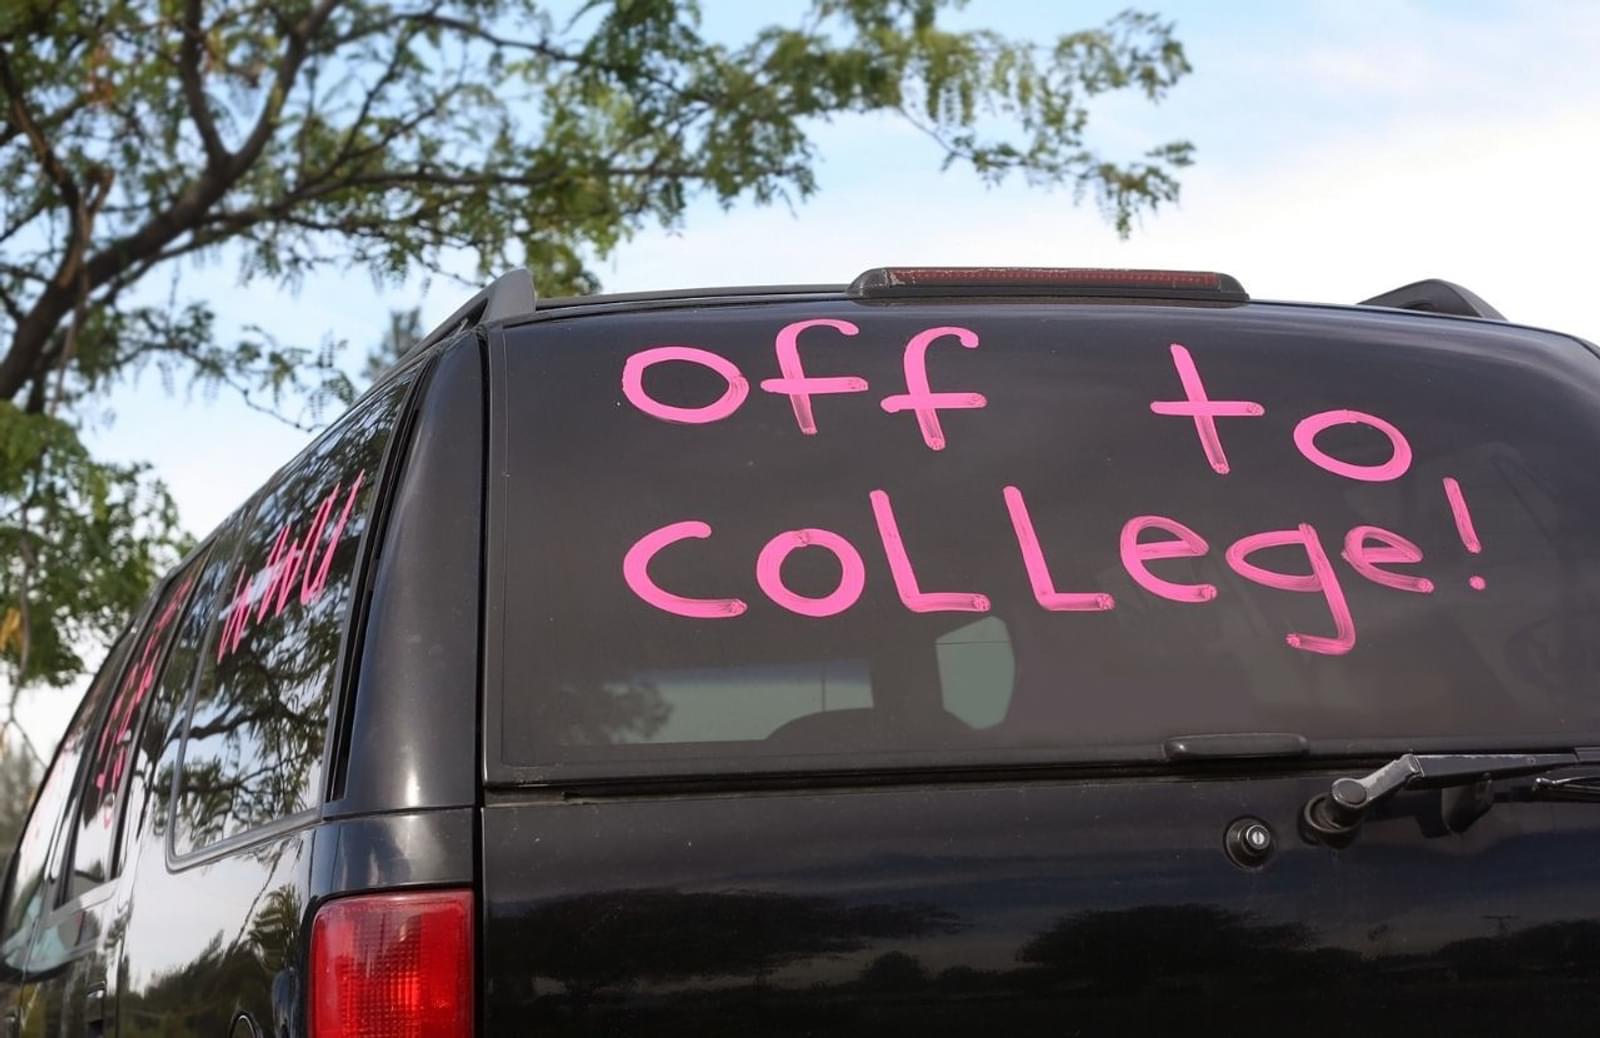 Black SUV with the words "off to college!" written in pink on window